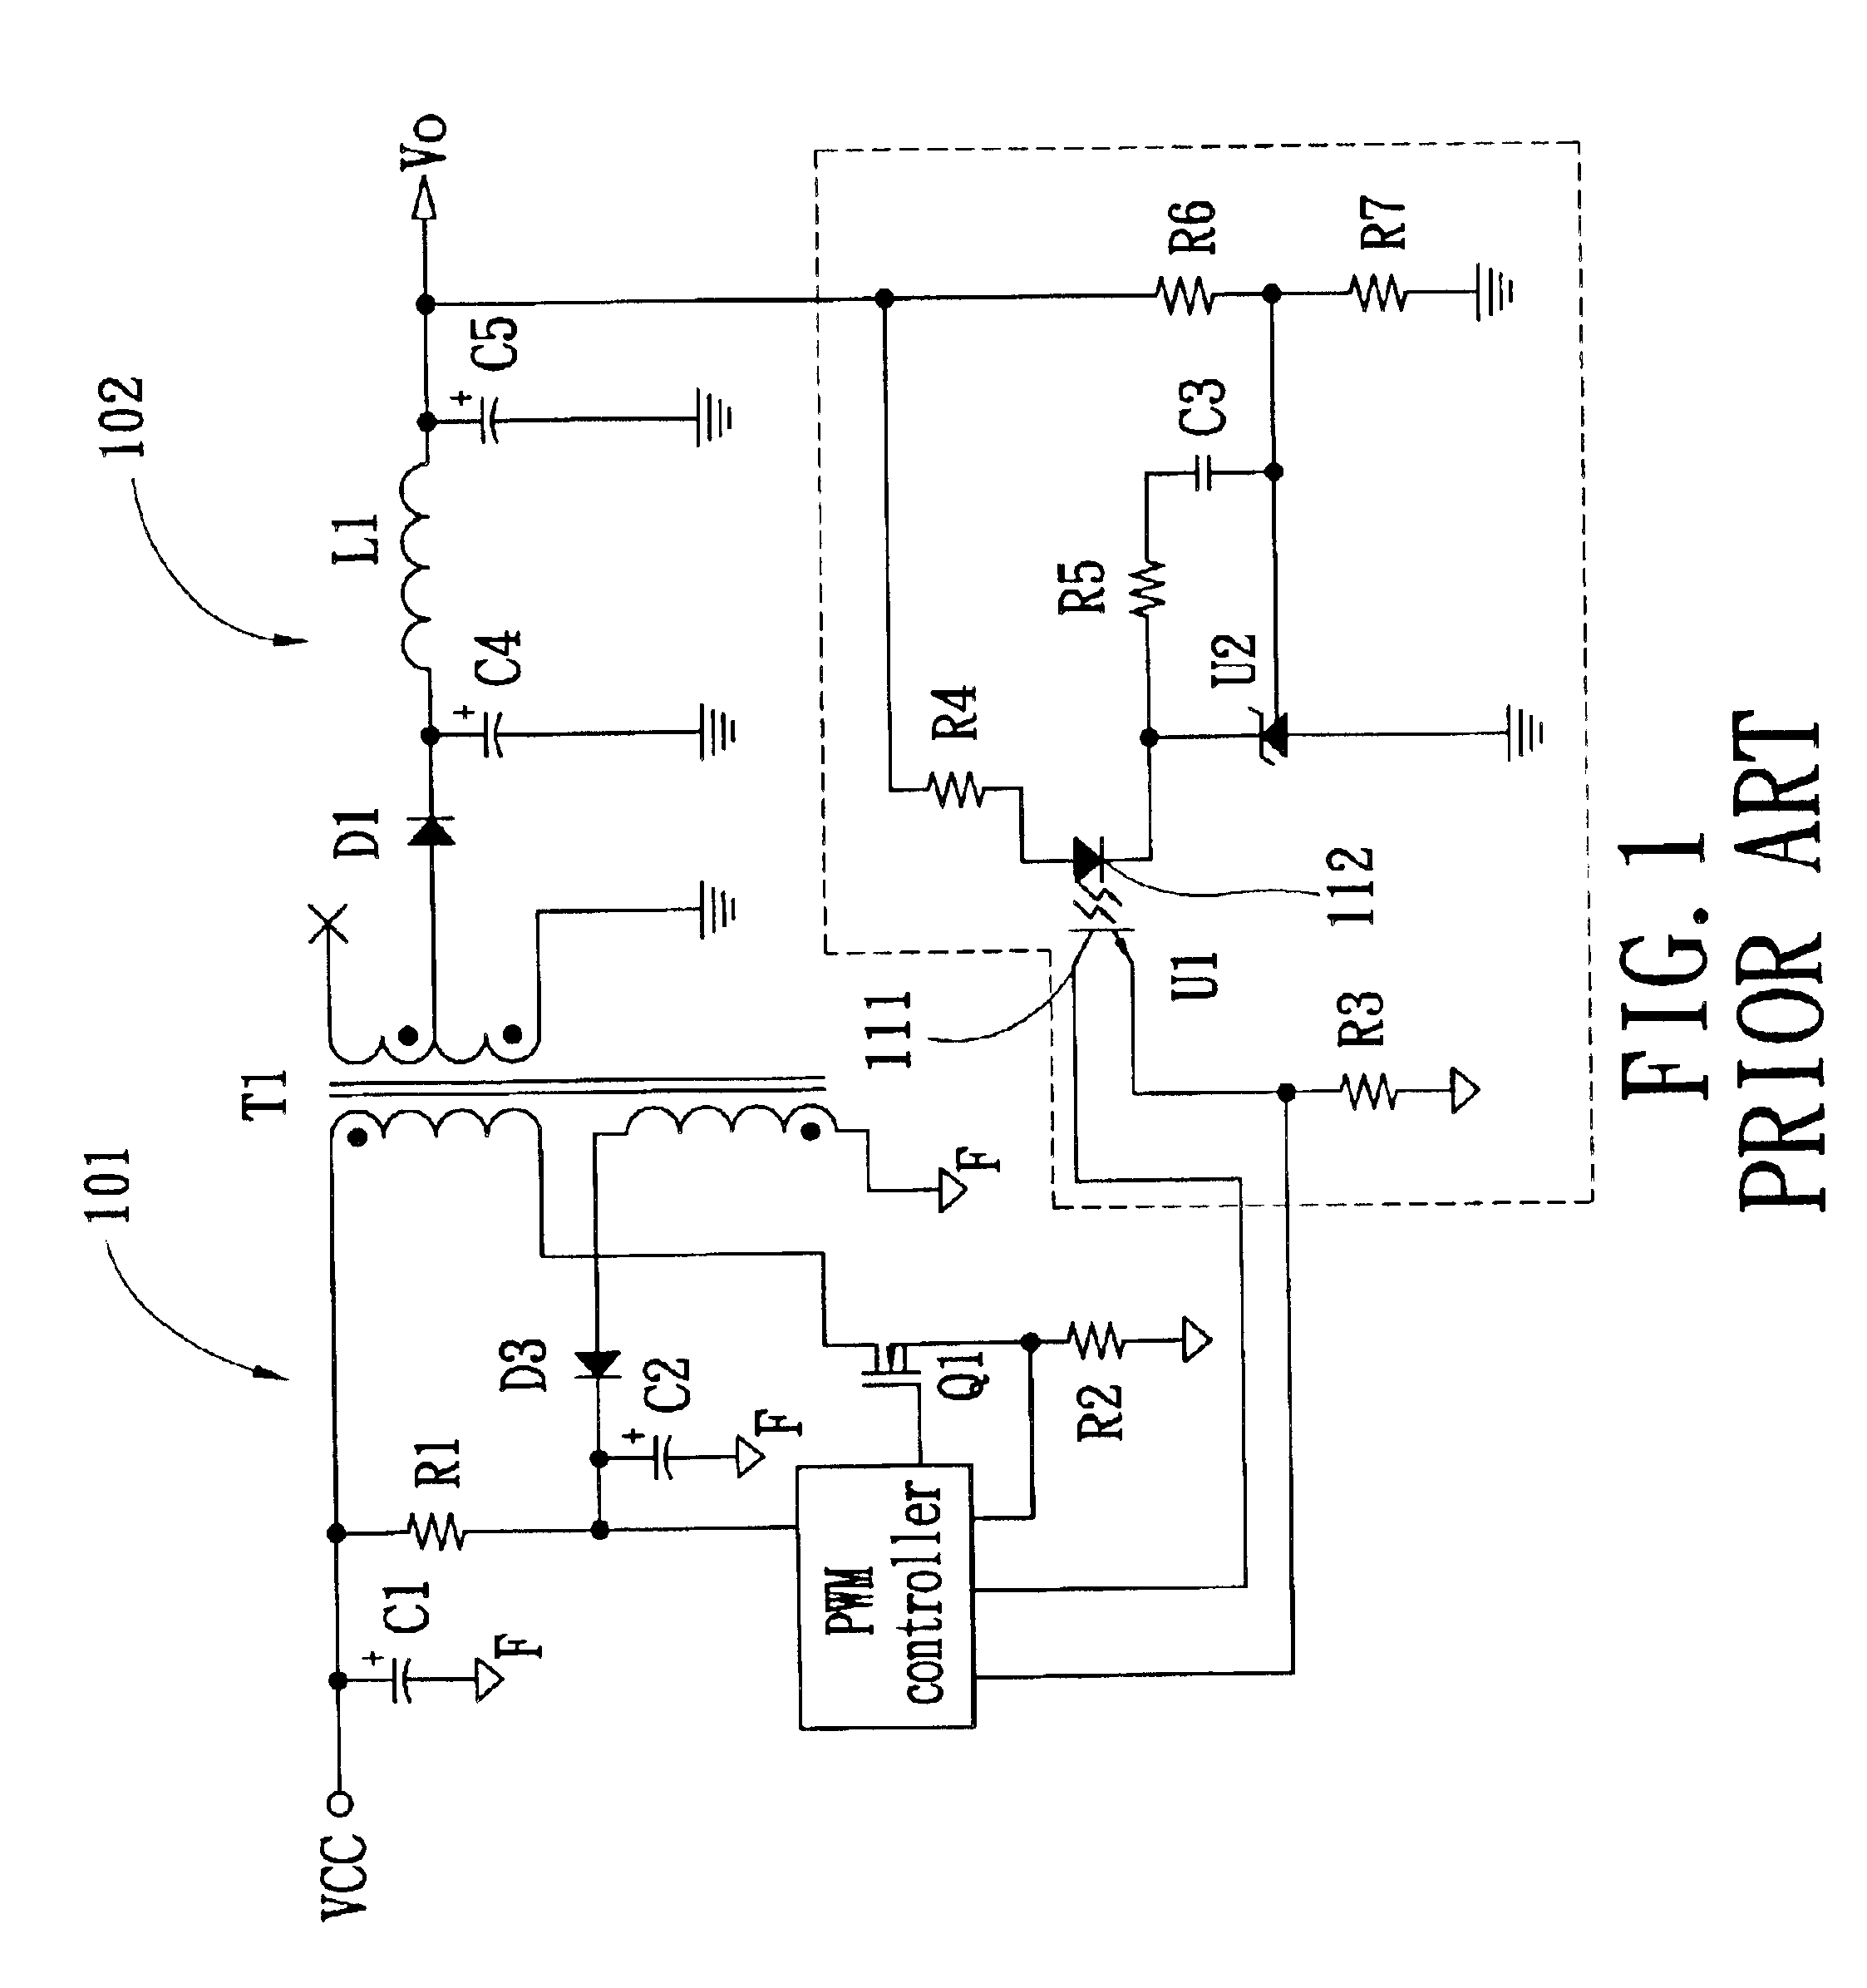 Current detecting circuit AC/DC flyback switching power supply